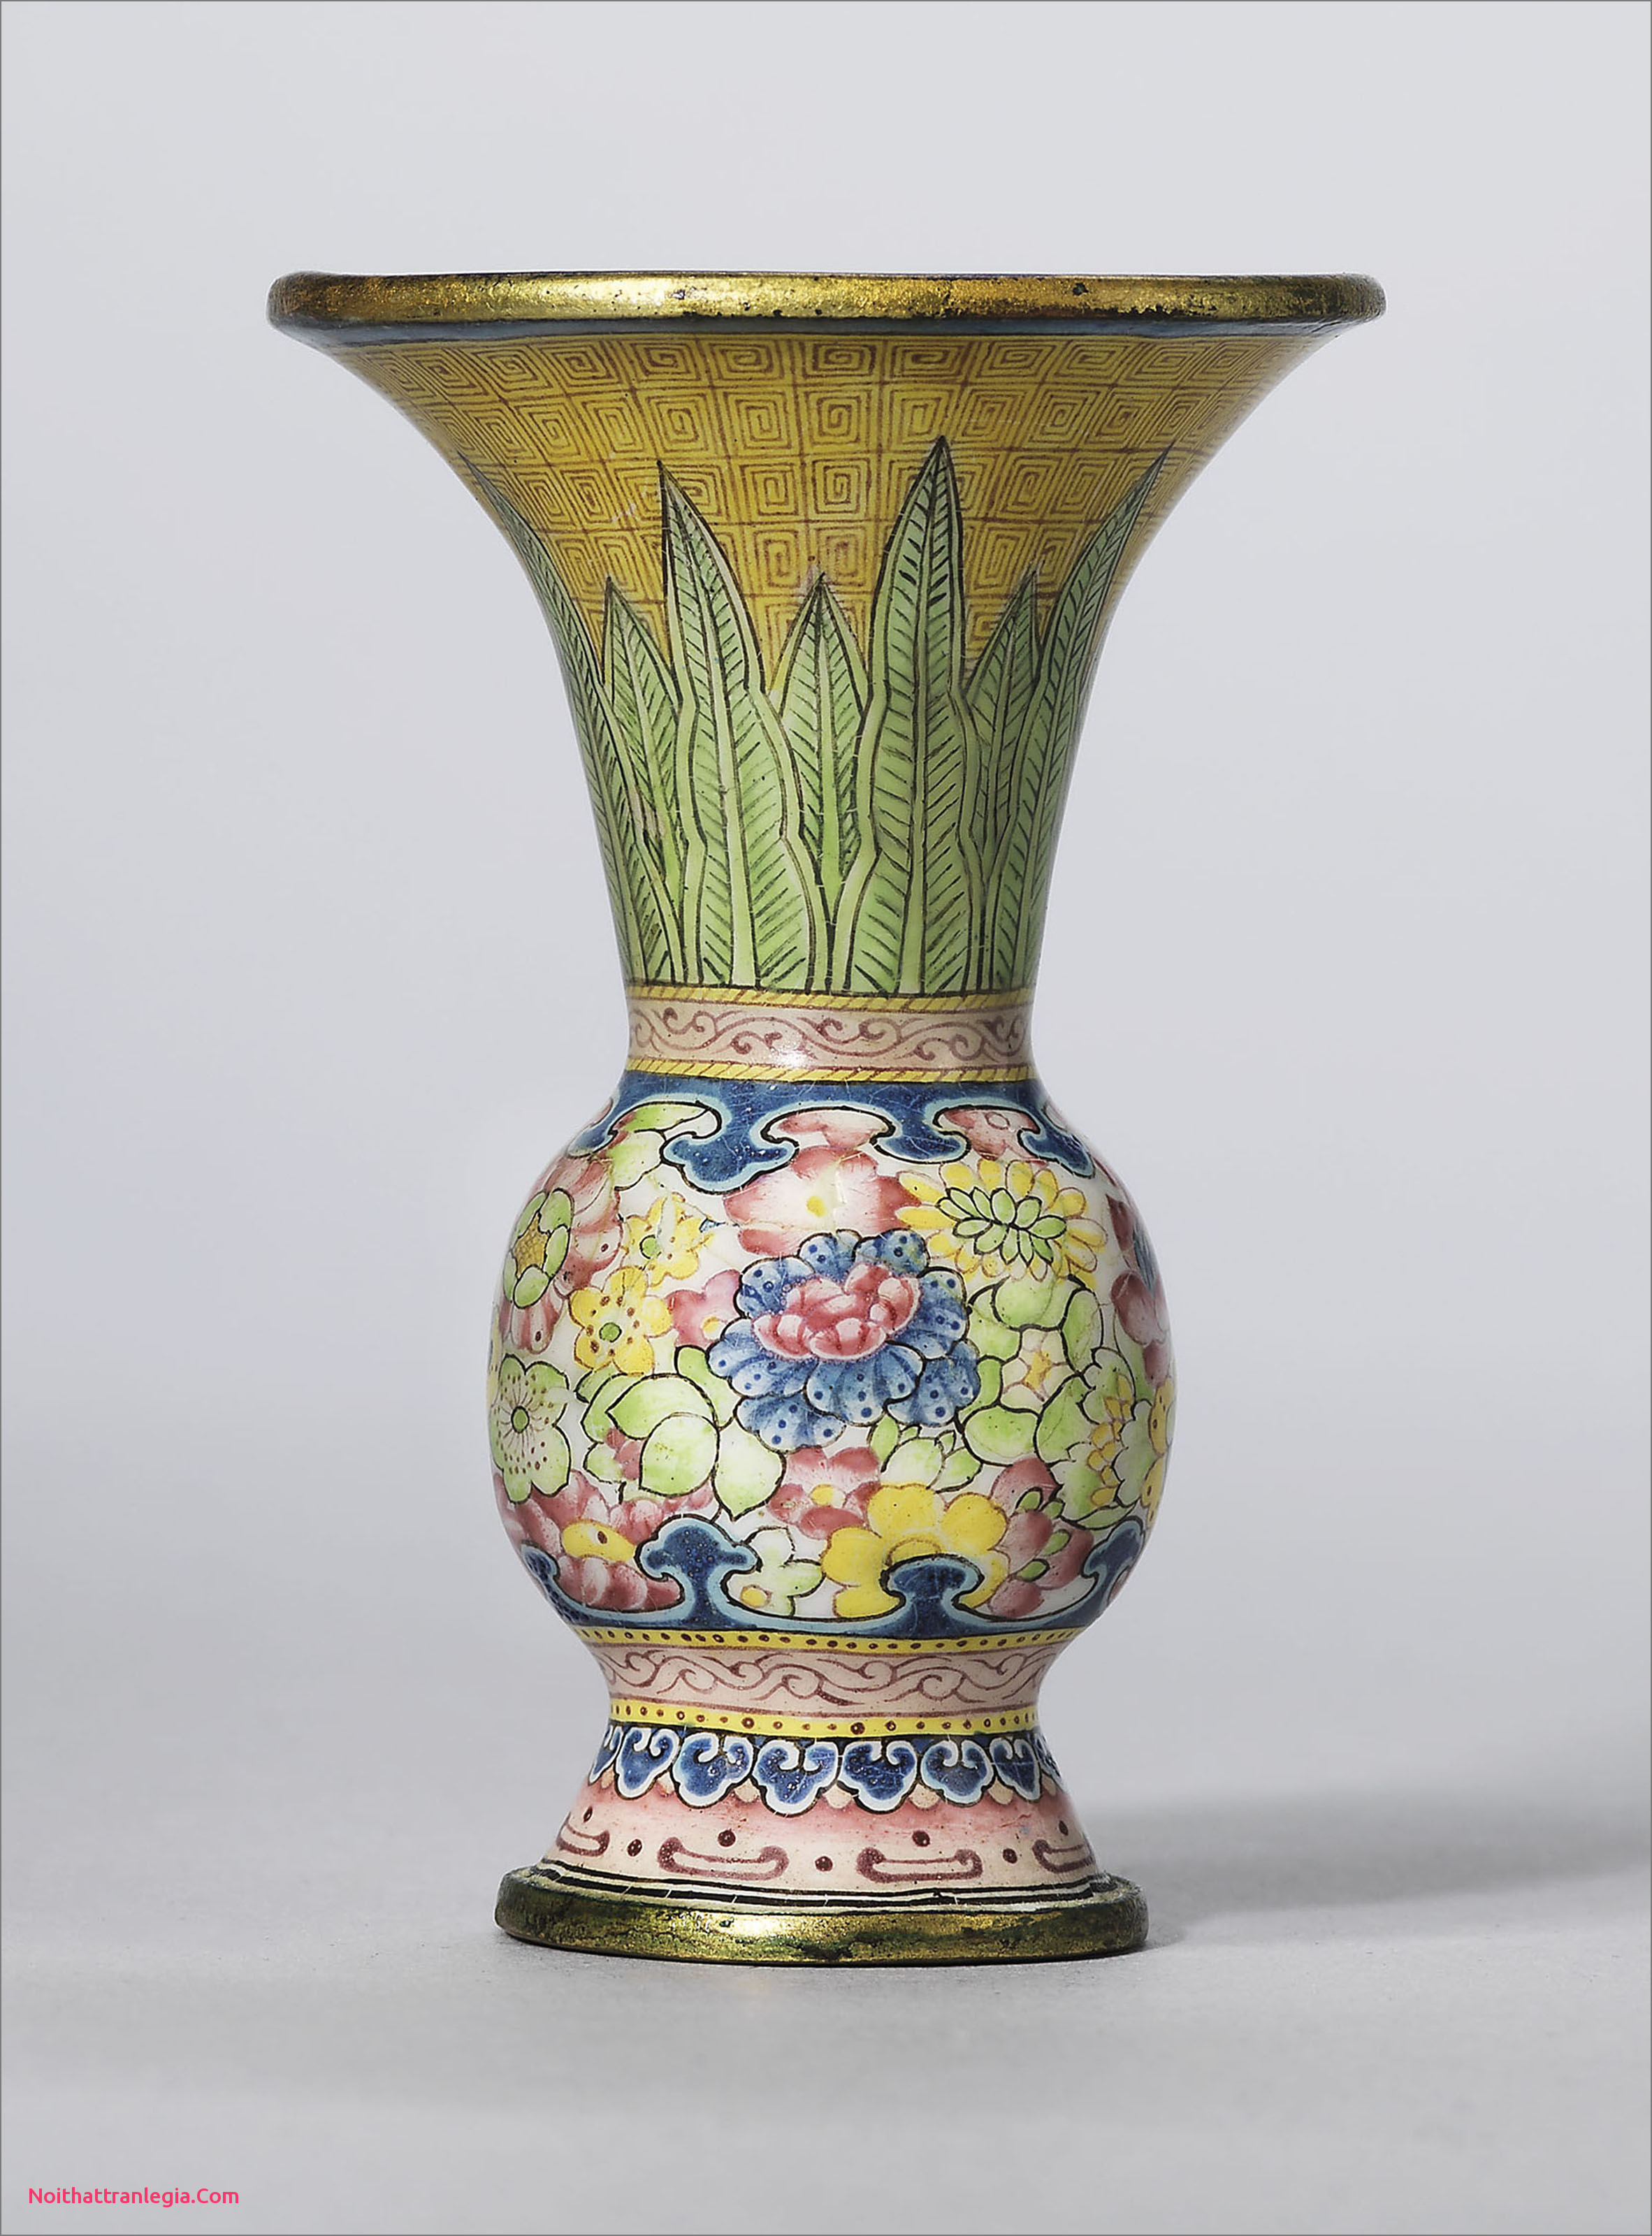 13 Great Flower Vase Antique 2024 free download flower vase antique of 20 chinese antique vase noithattranlegia vases design regarding chinese antique vase unique a guide to the symbolism of flowers on chinese ceramics of chinese antique 